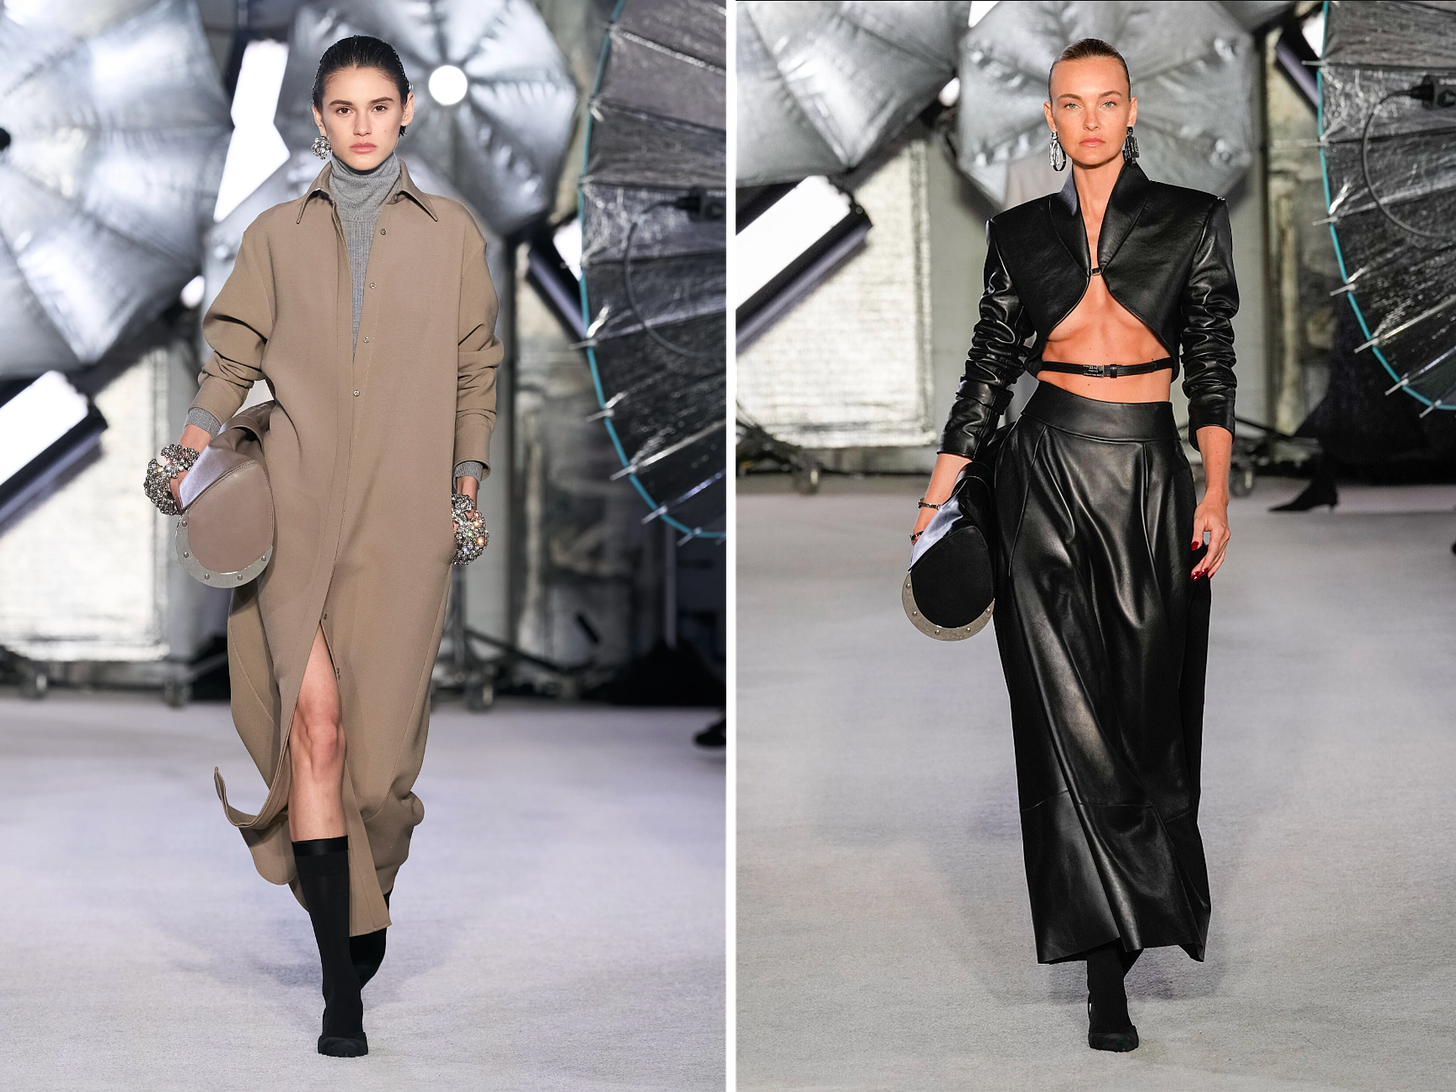 Images of the Brandon Maxwell FW23 Runway show.